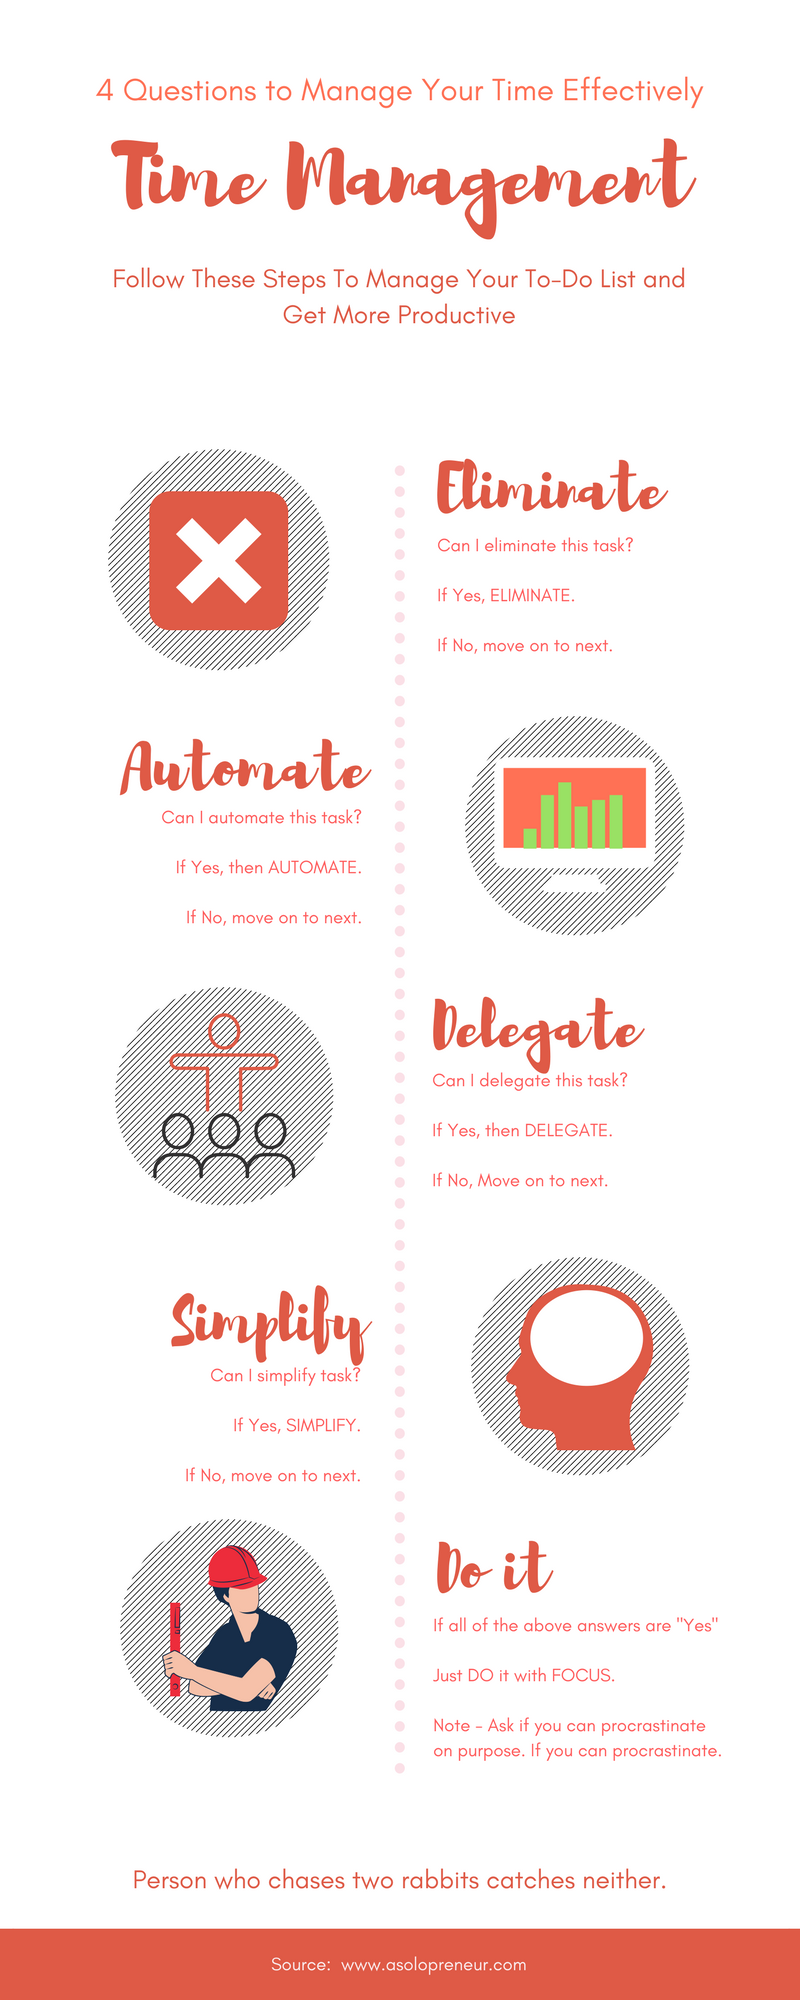 Time Management for bloggers, freelancers and solo entrepreneurs (Solopreneurs).png